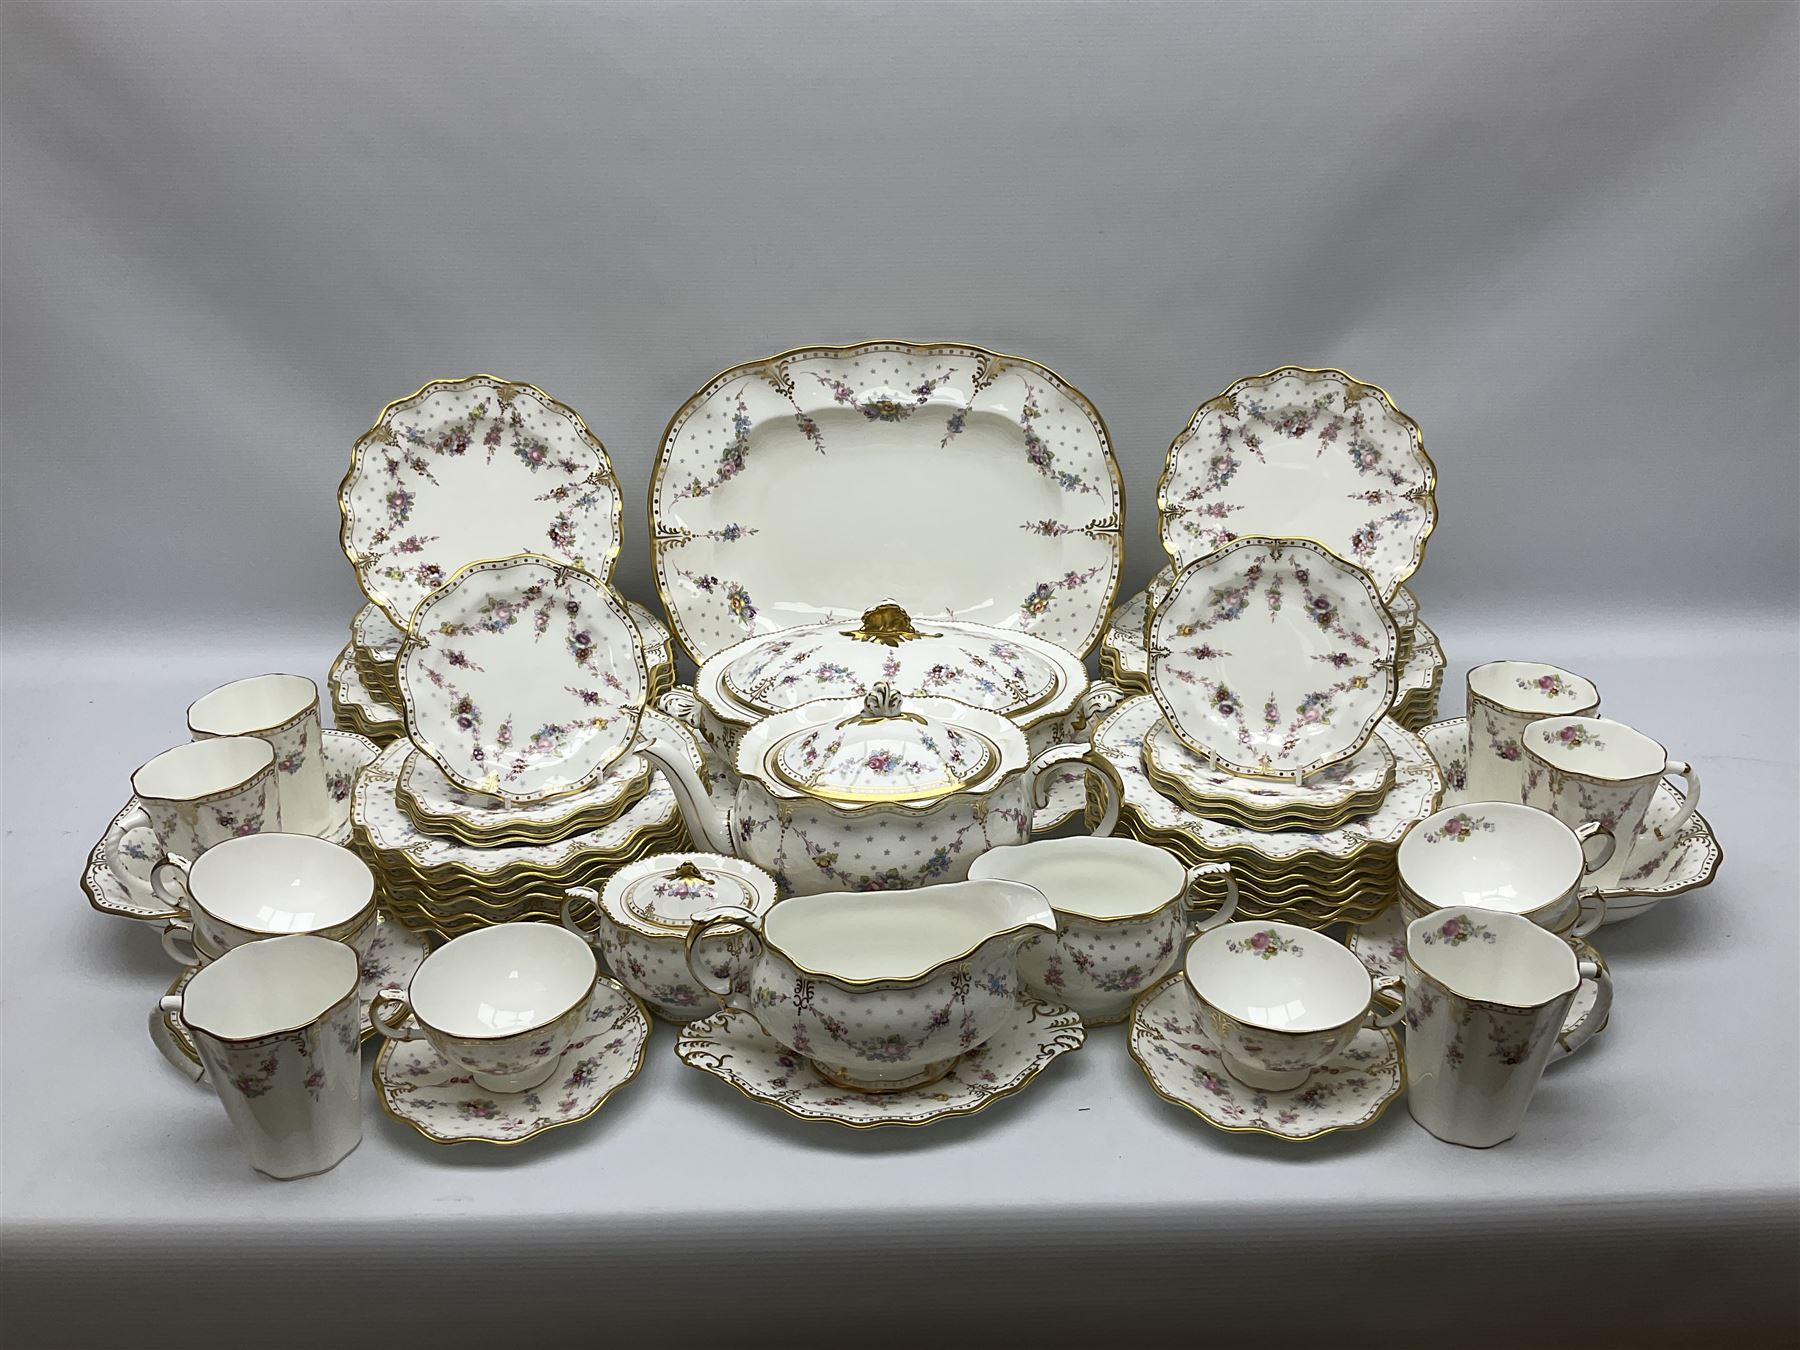 Modern Royal Crown Derby part tea and dinner service - Image 11 of 11